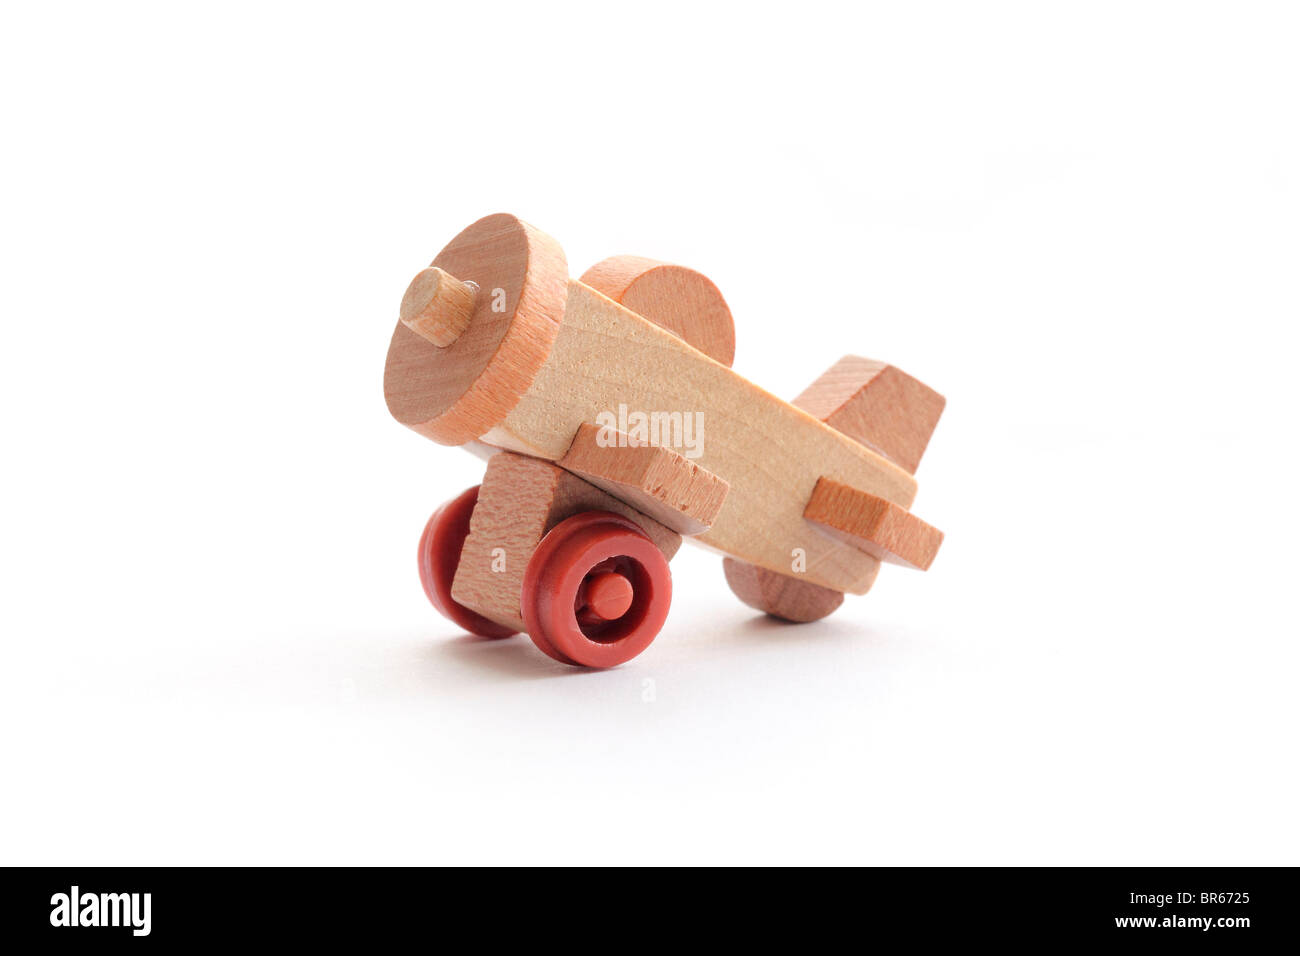 Close-up photograph of a one-inch wooden toy airplane isolated on a white background. Stock Photo